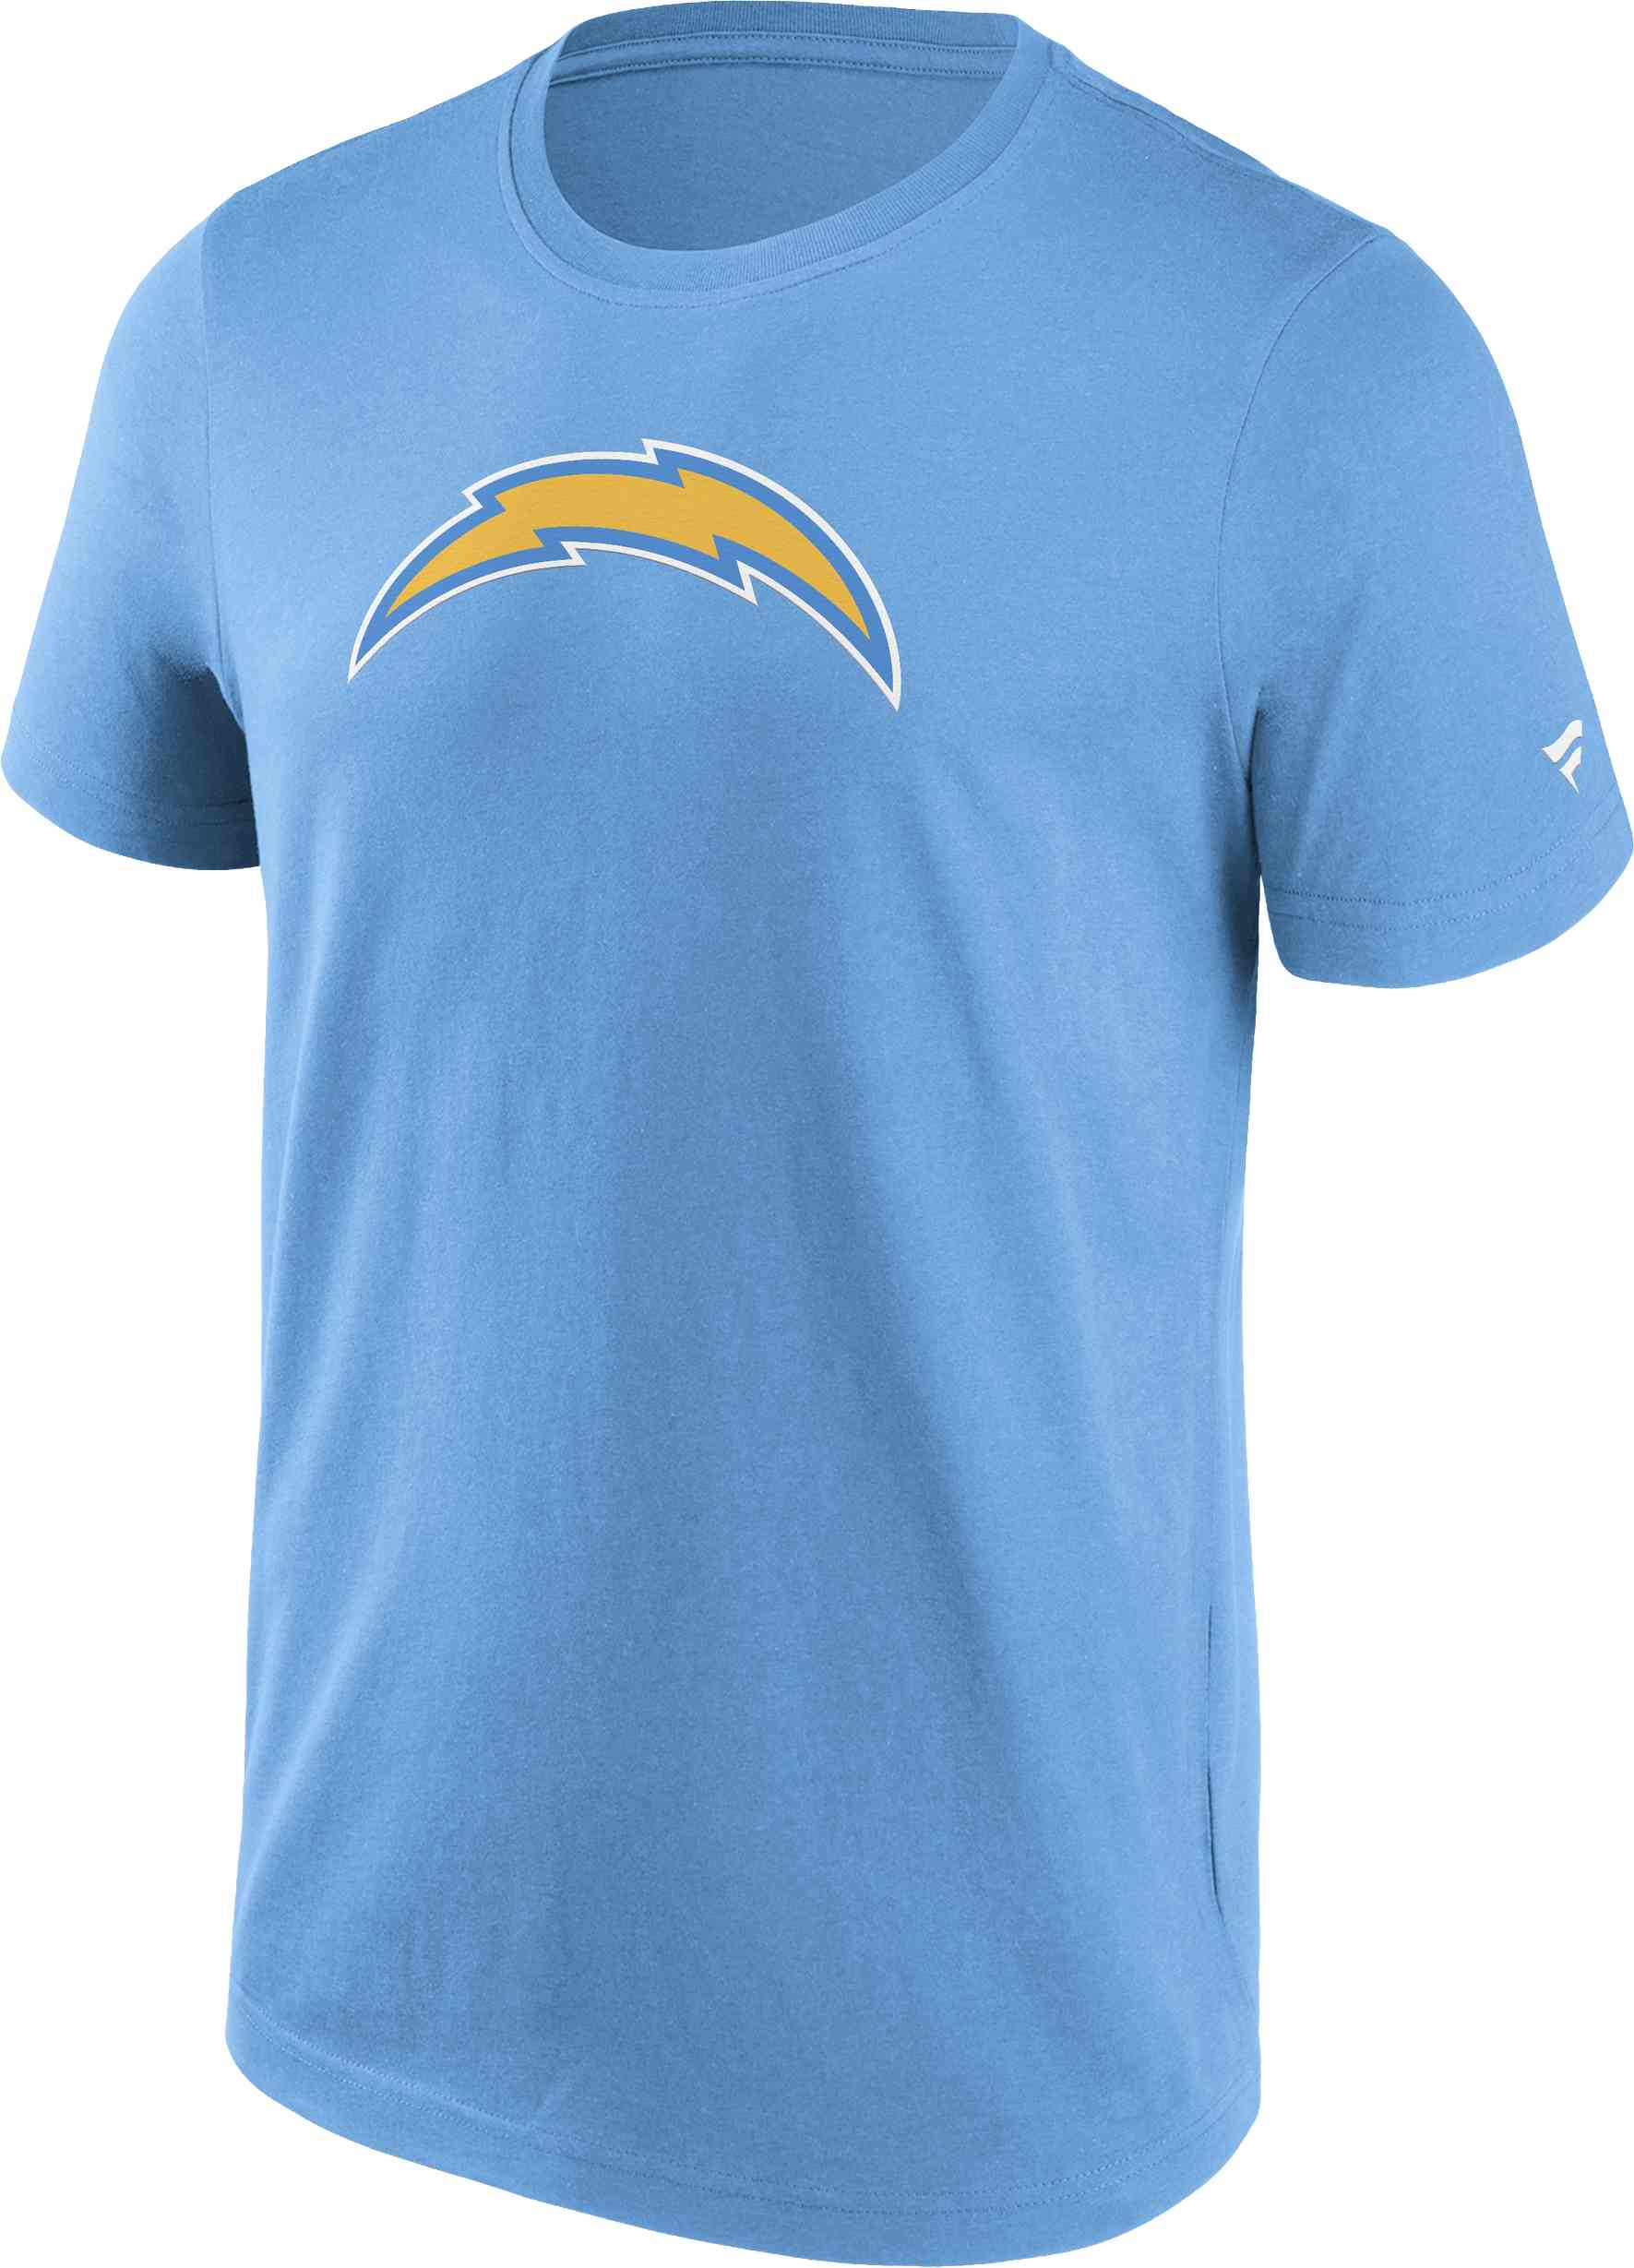 Fanatics - NFL Los Angeles Chargers Primary Logo Graphic T-Shirt